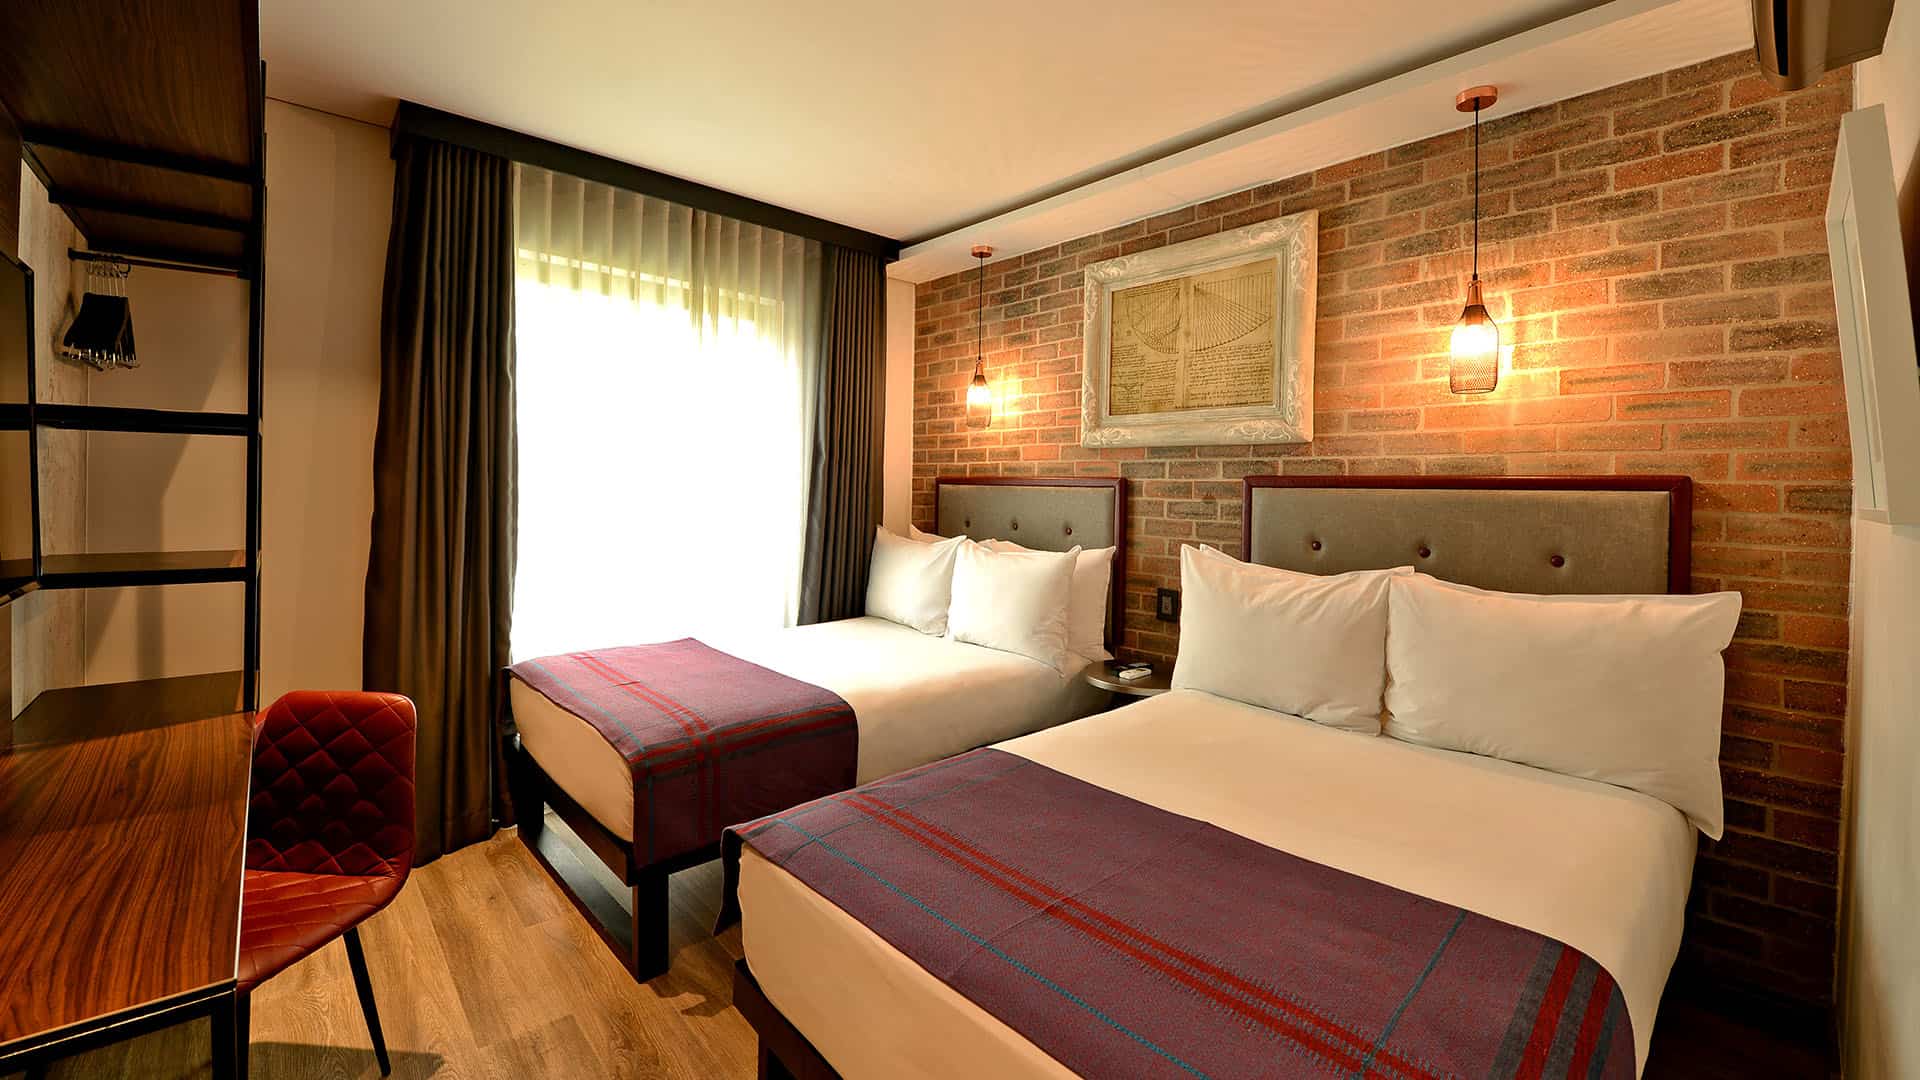 Hotel Perte is all about affordability.